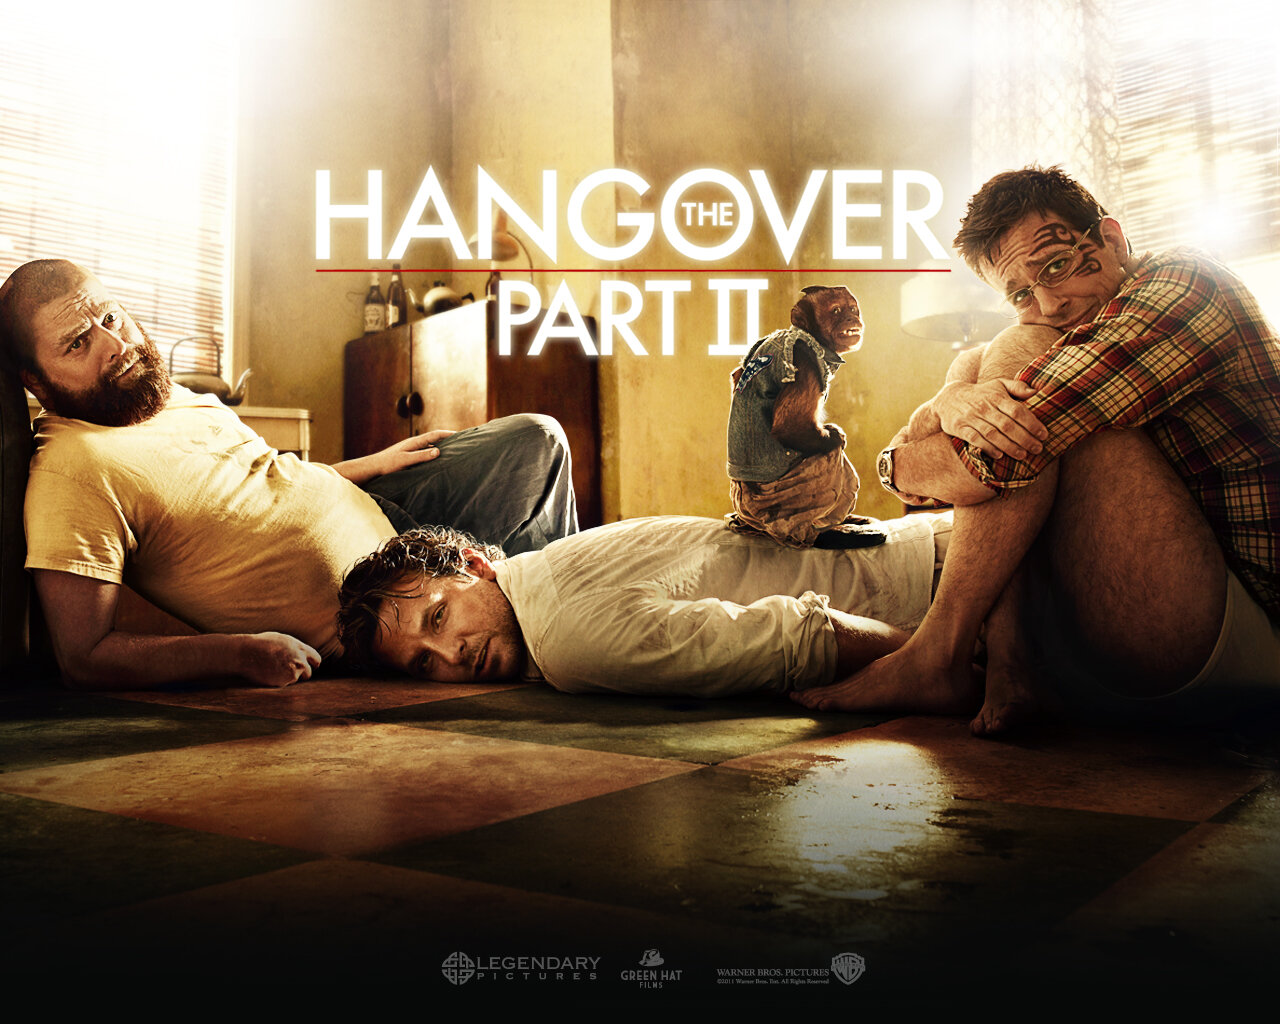 Hangover 2 pictures at the end